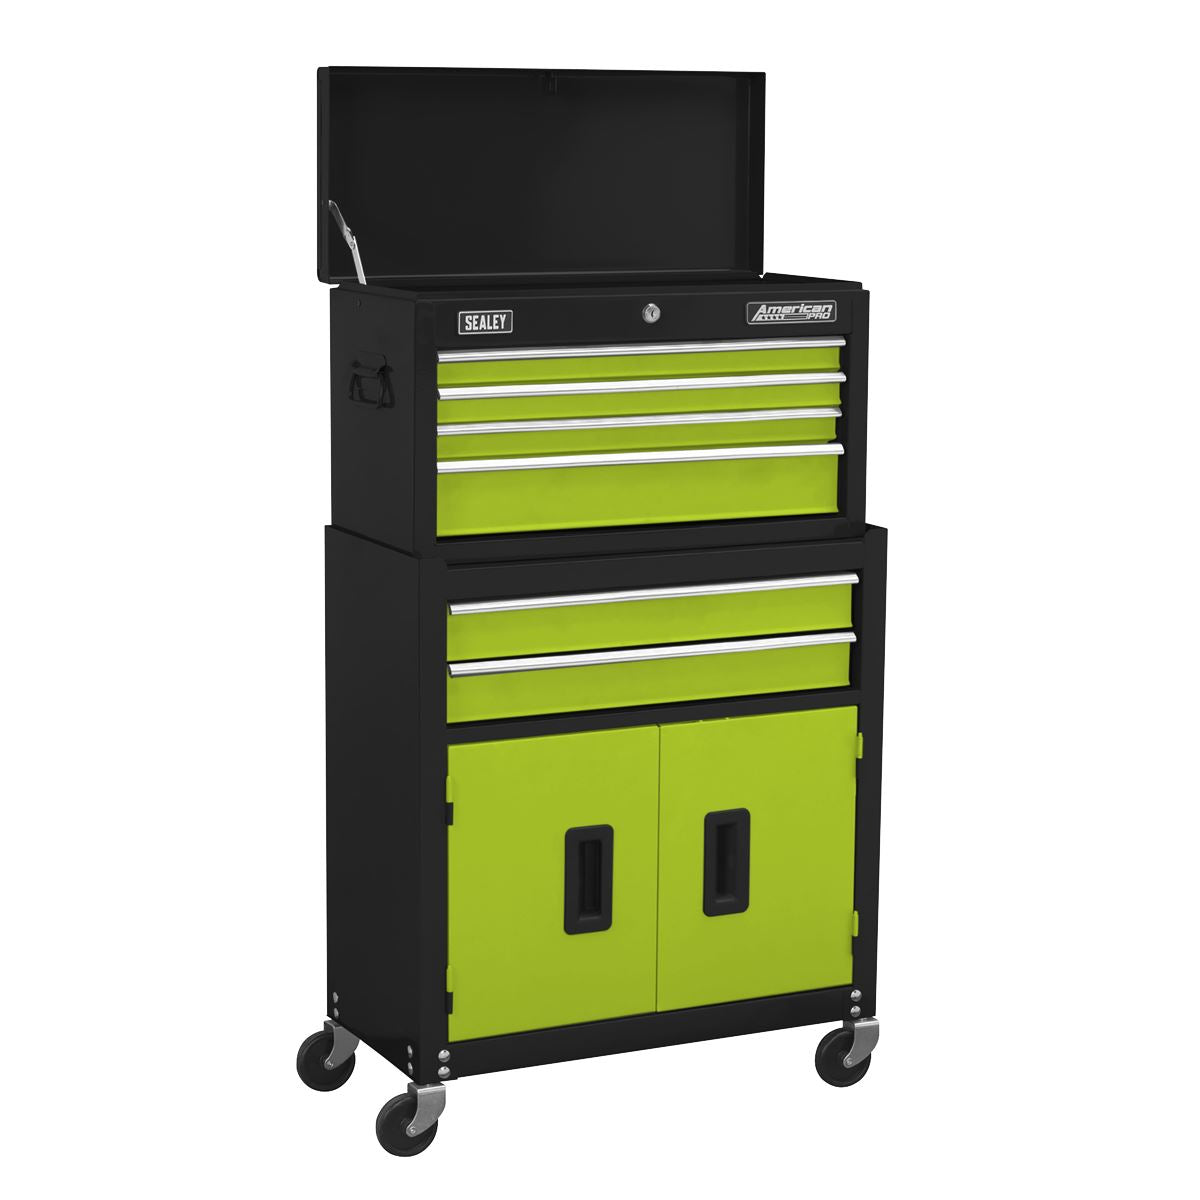 Sealey American Pro Topchest & Rollcab Combination 6 Drawer with Ball-Bearing Slides - Hi-Vis Green